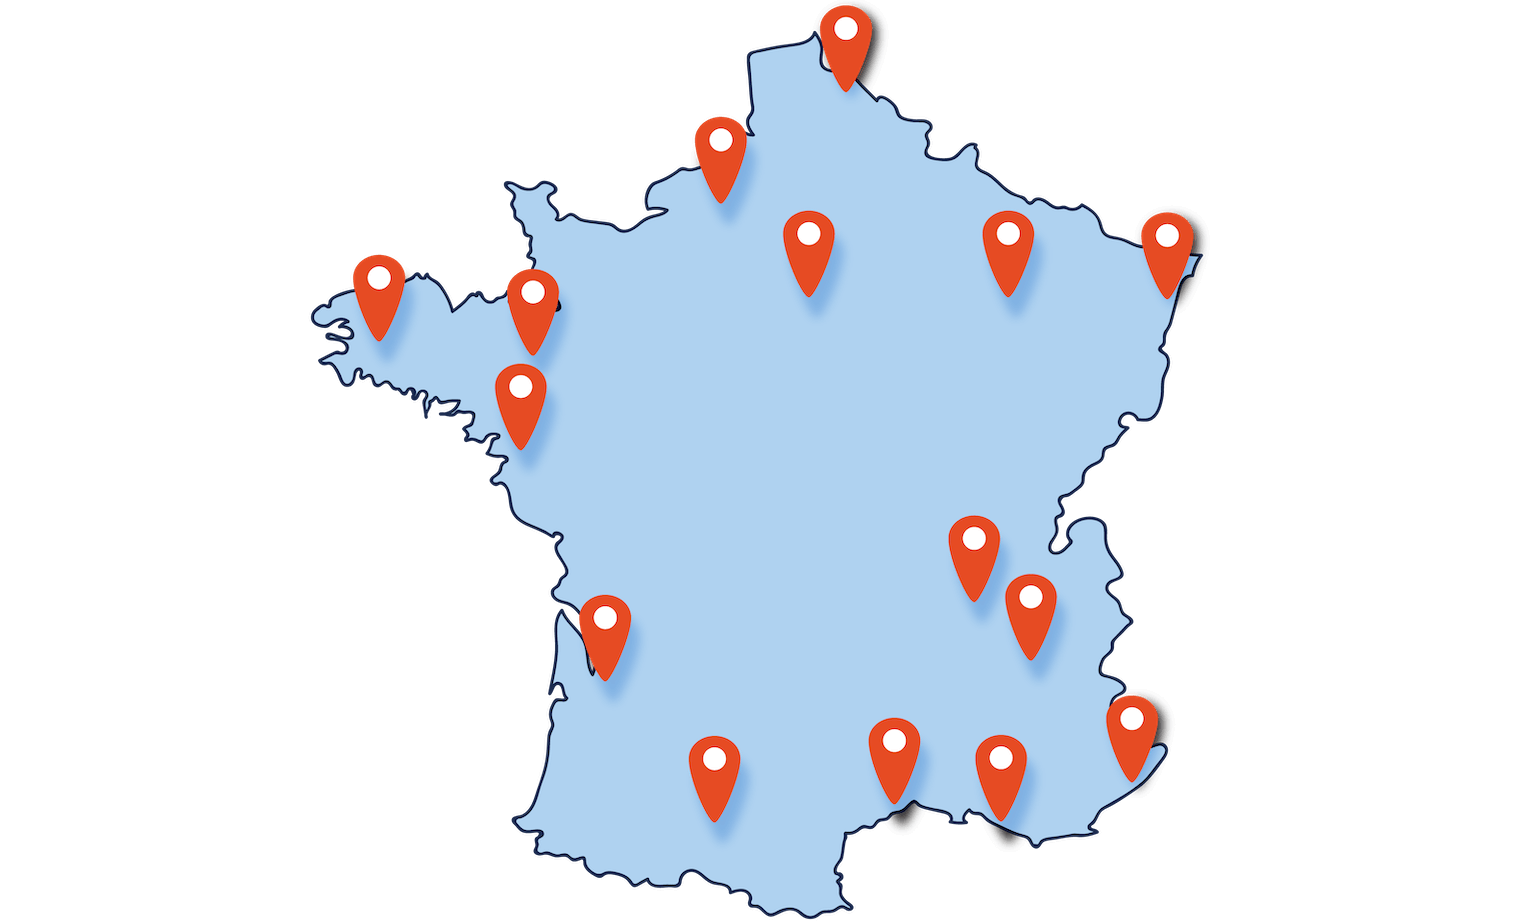 Illustration of the map of France depicting the metropolitan cities.